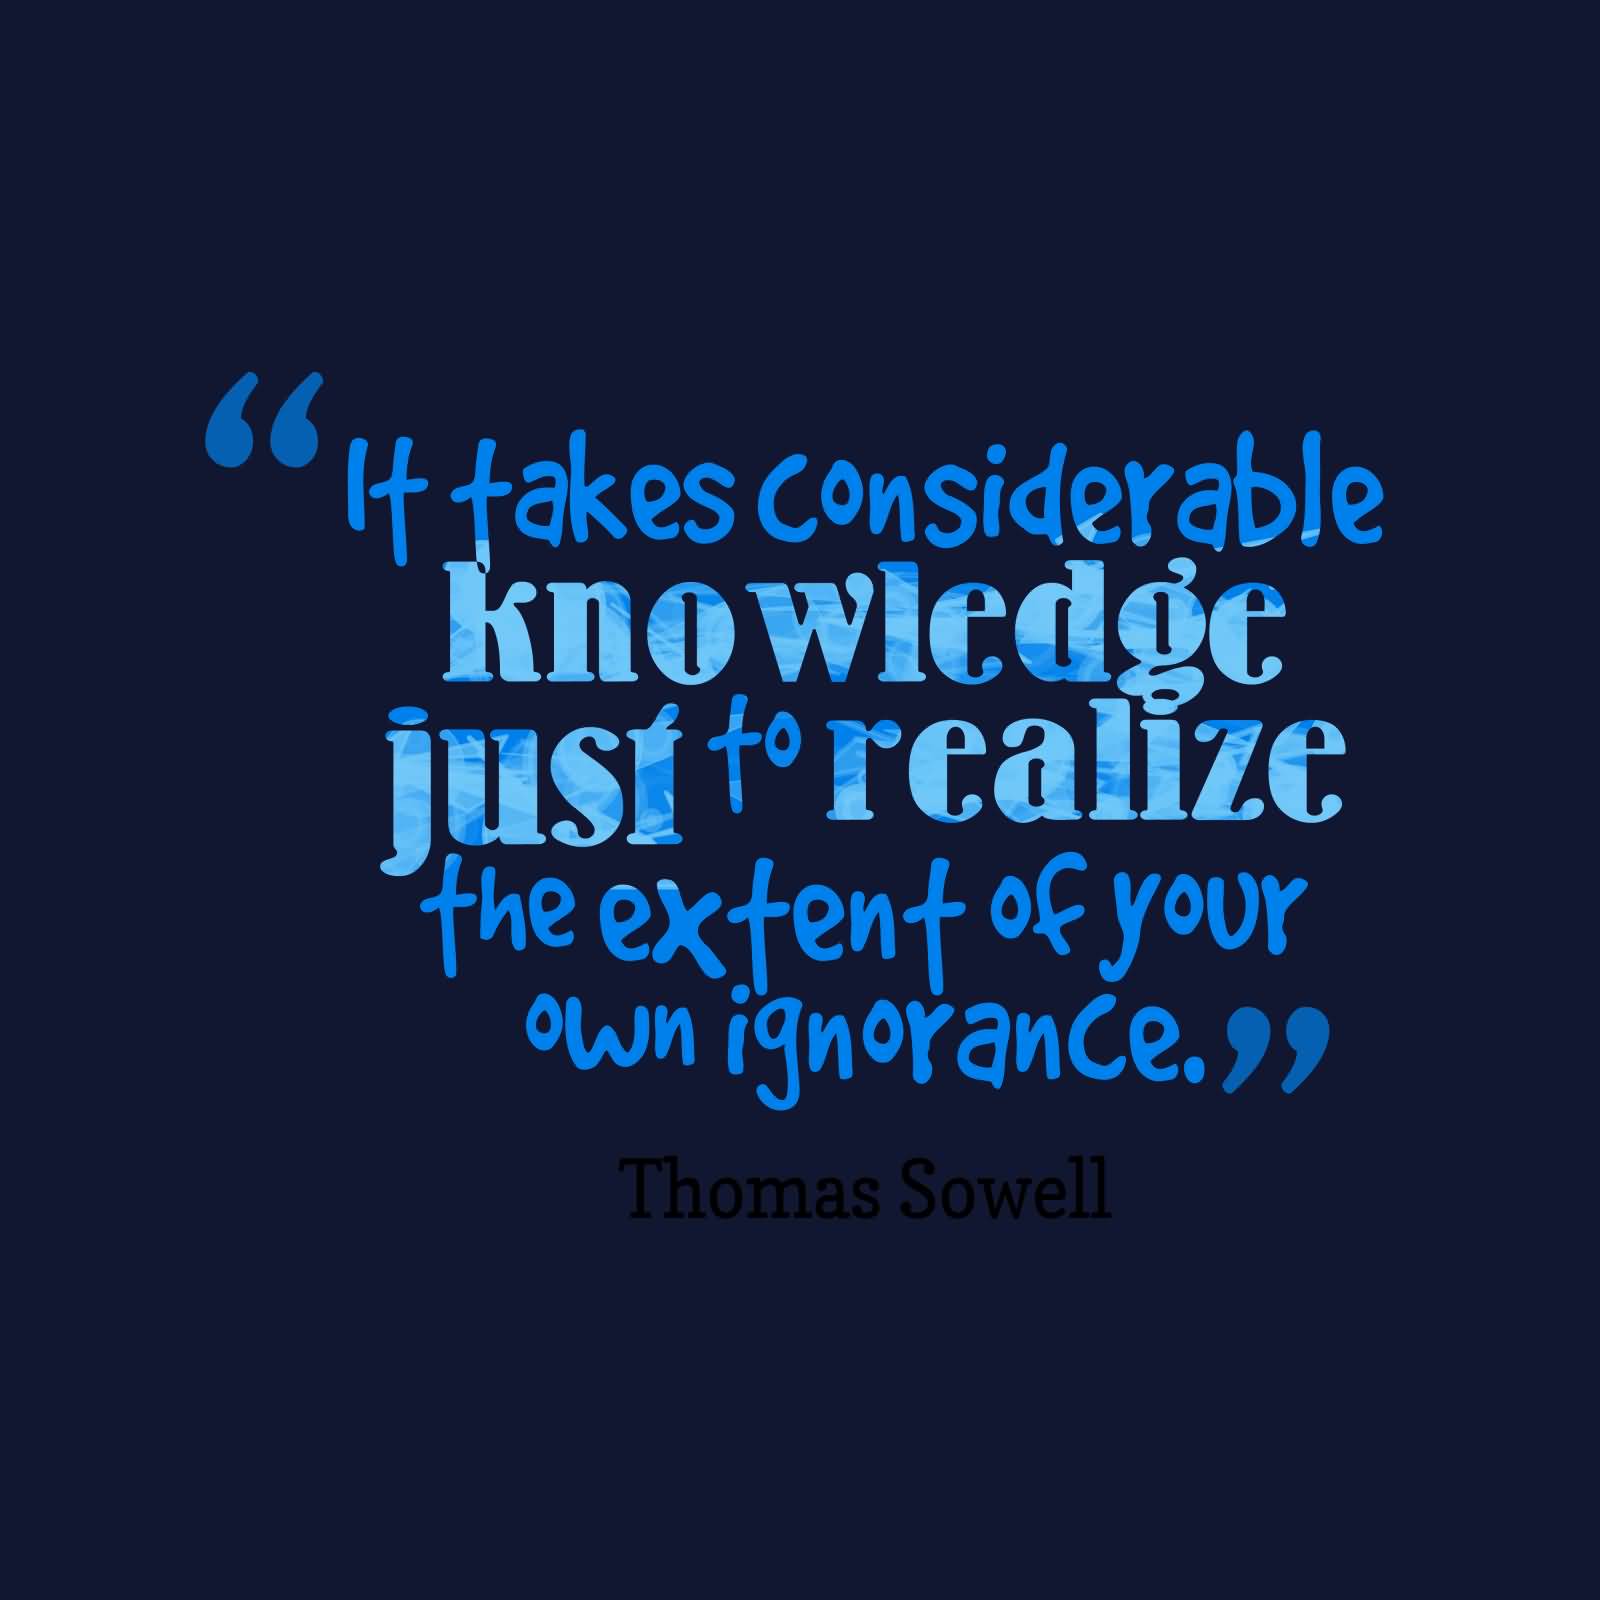 It takes considerable knowledge just to realize the extent of your own ignorance - Thomas Sowell